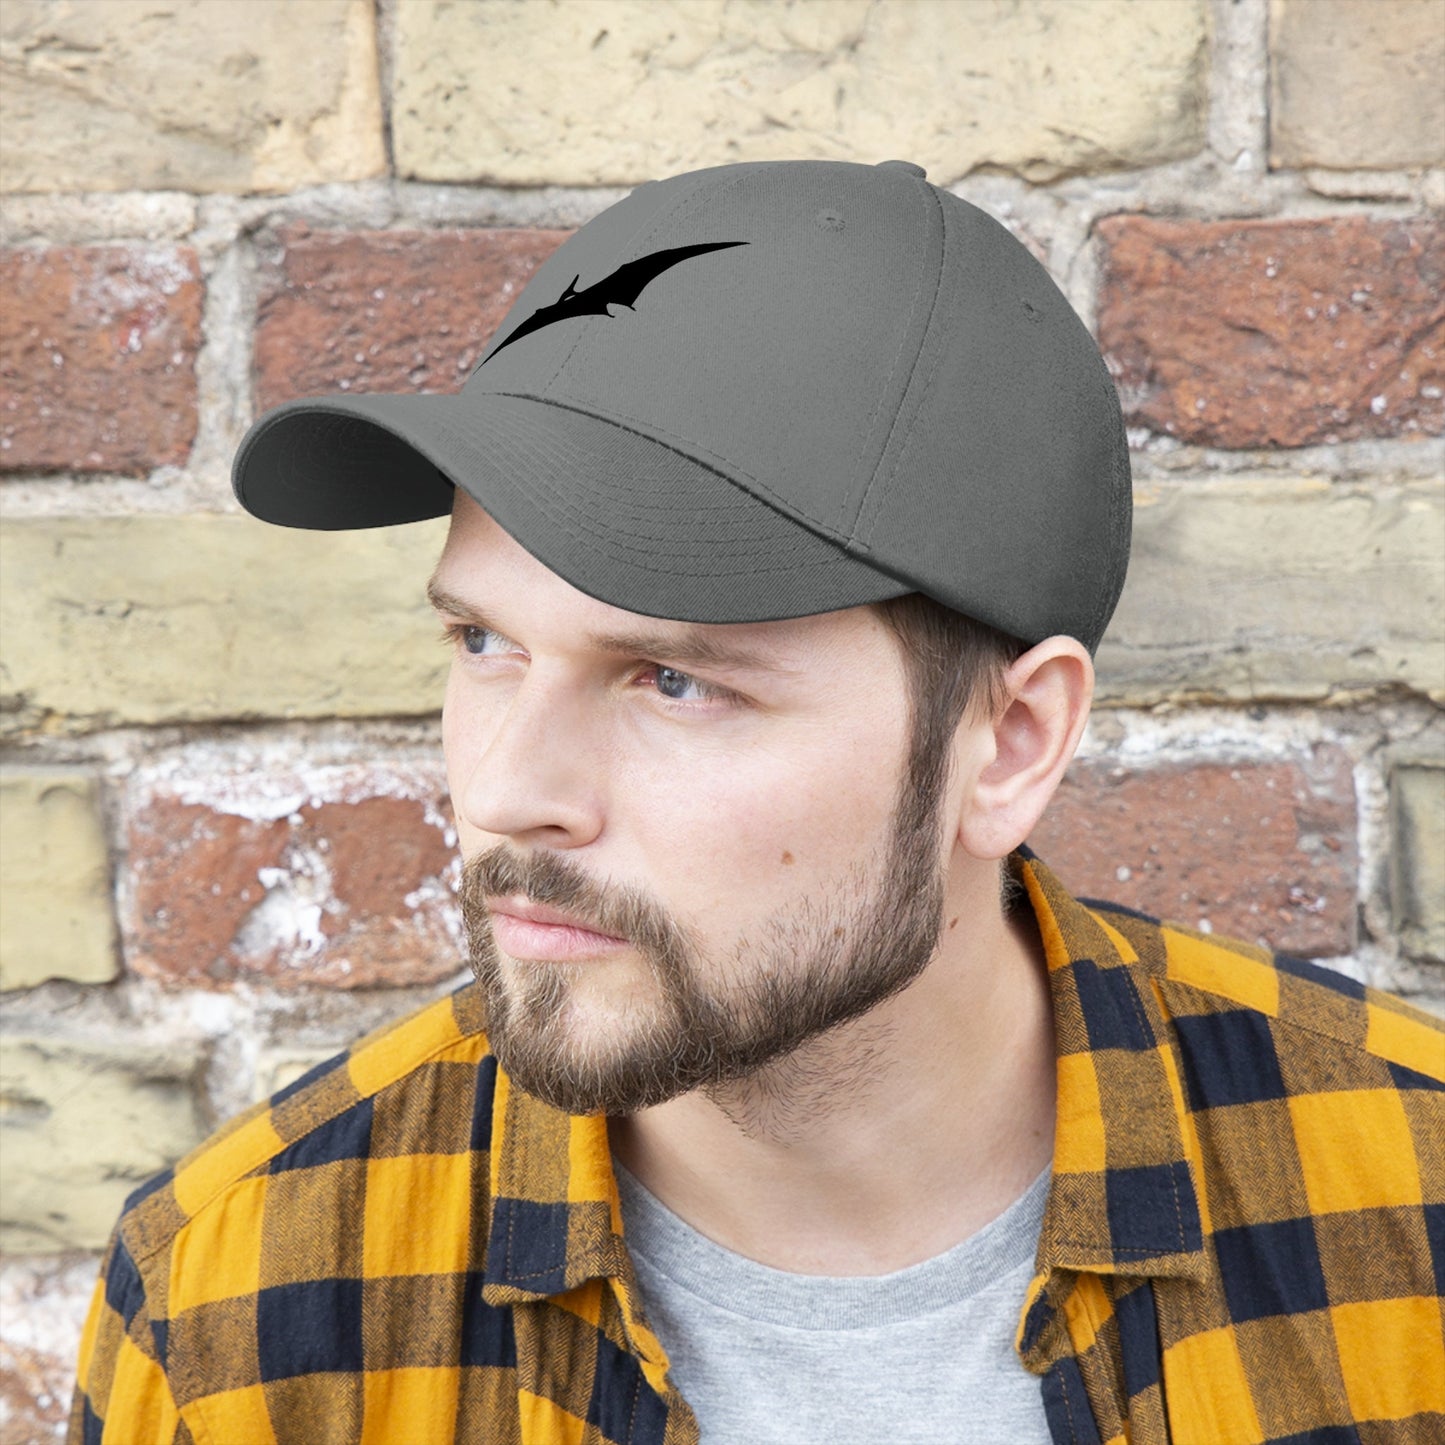 Pterodactyl Twill Hat | Paleontologist Gift for Dinosaur Lovers